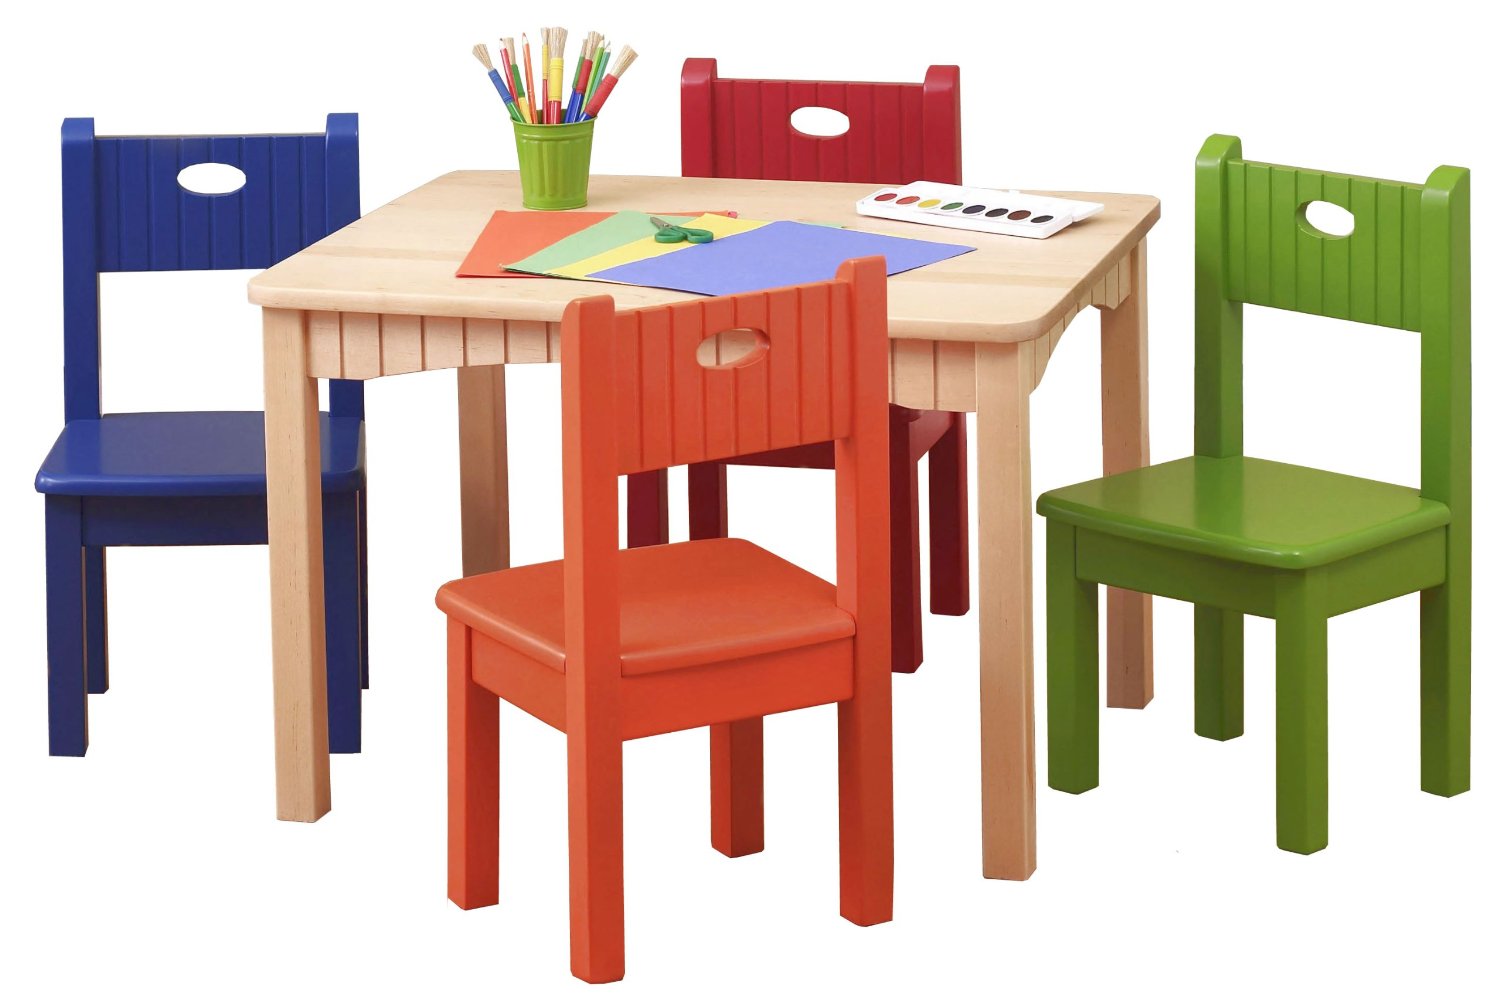 Kids table and chairs tips to purchase kids table and chairs TNXHLGZ